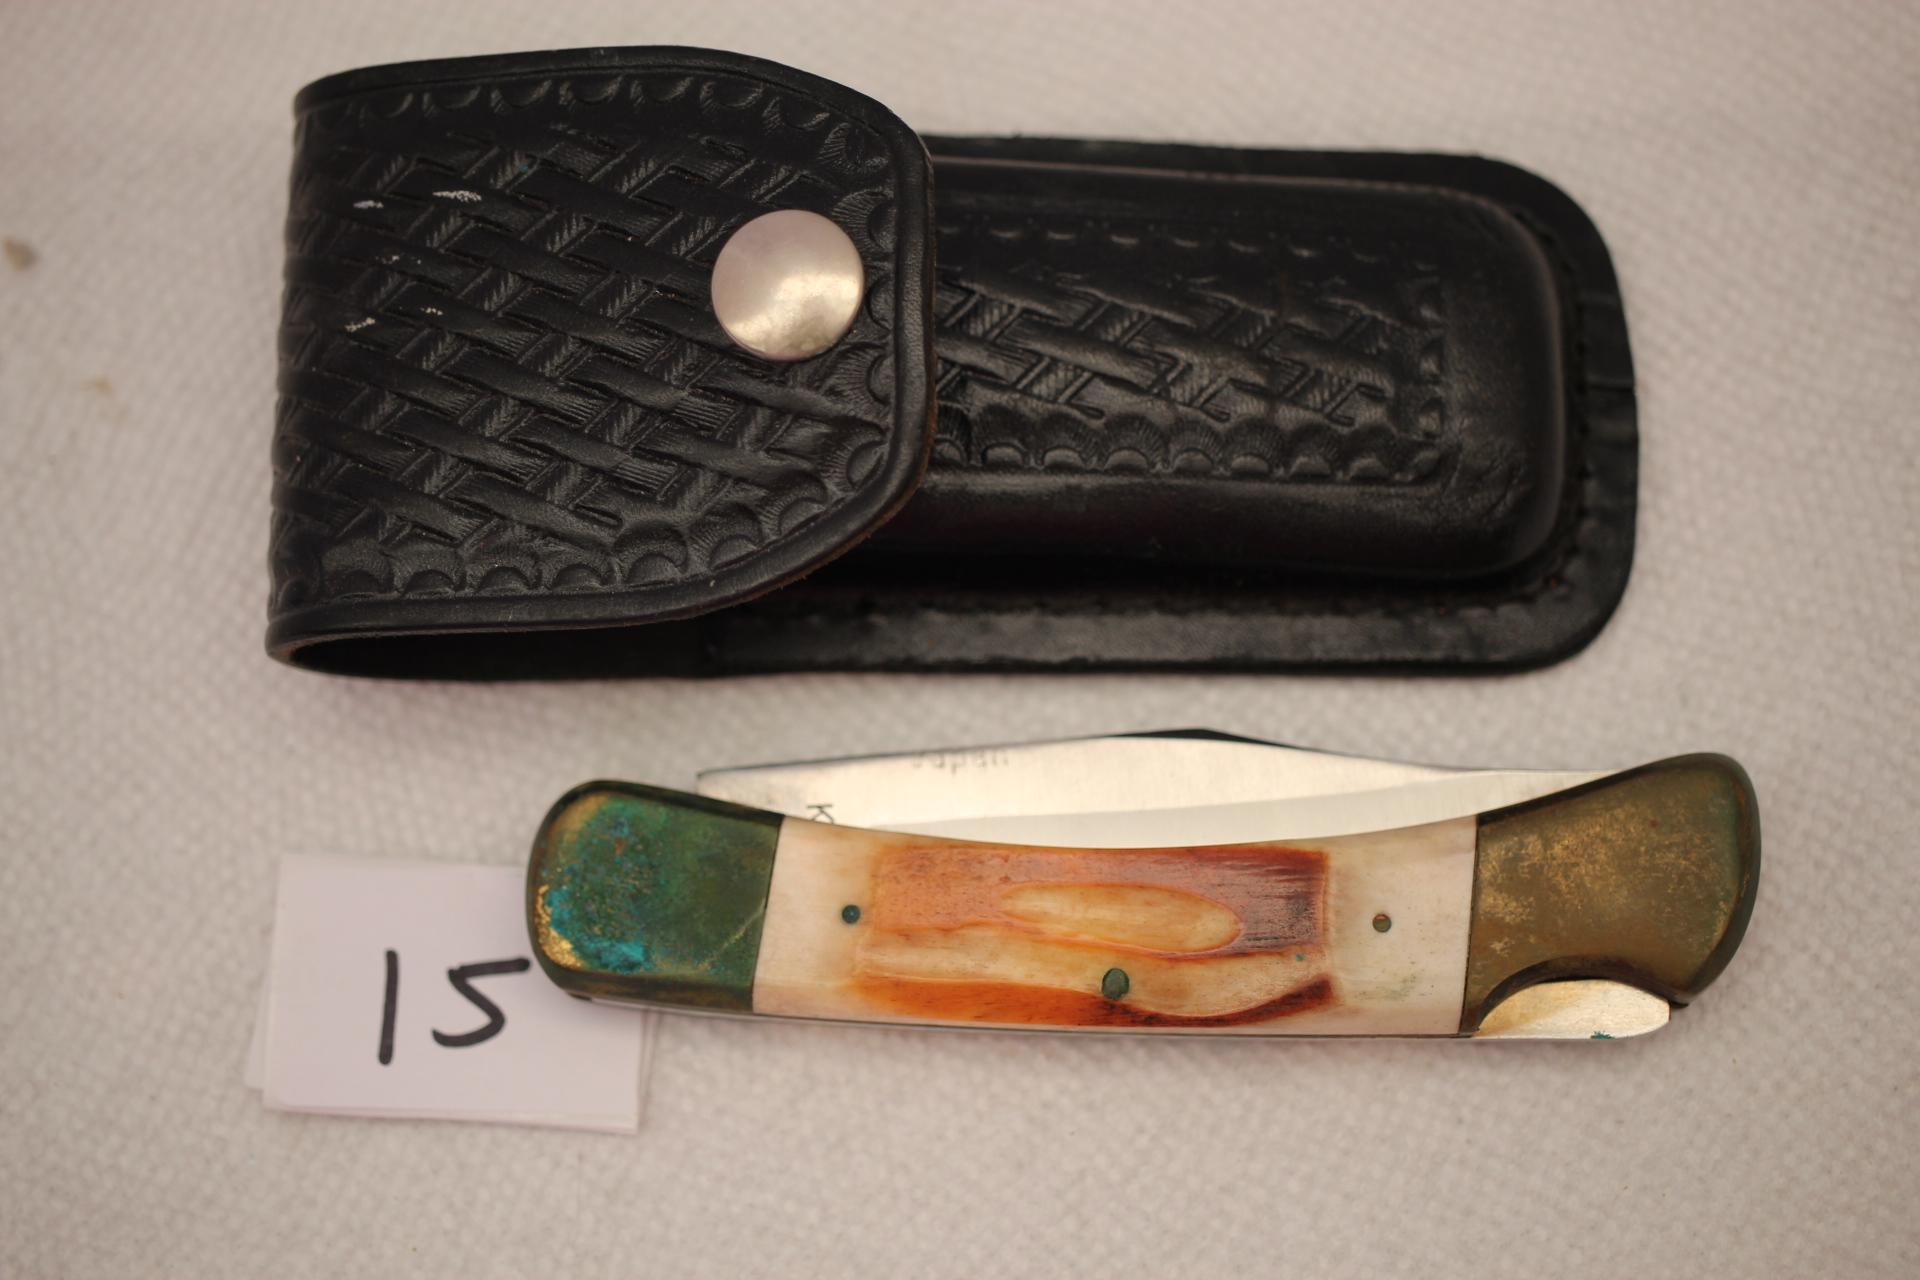 Knife & Leather Case, Parker-Imai, Surgical Steel, K-250, Made In Japan, 3 3/4" Blade